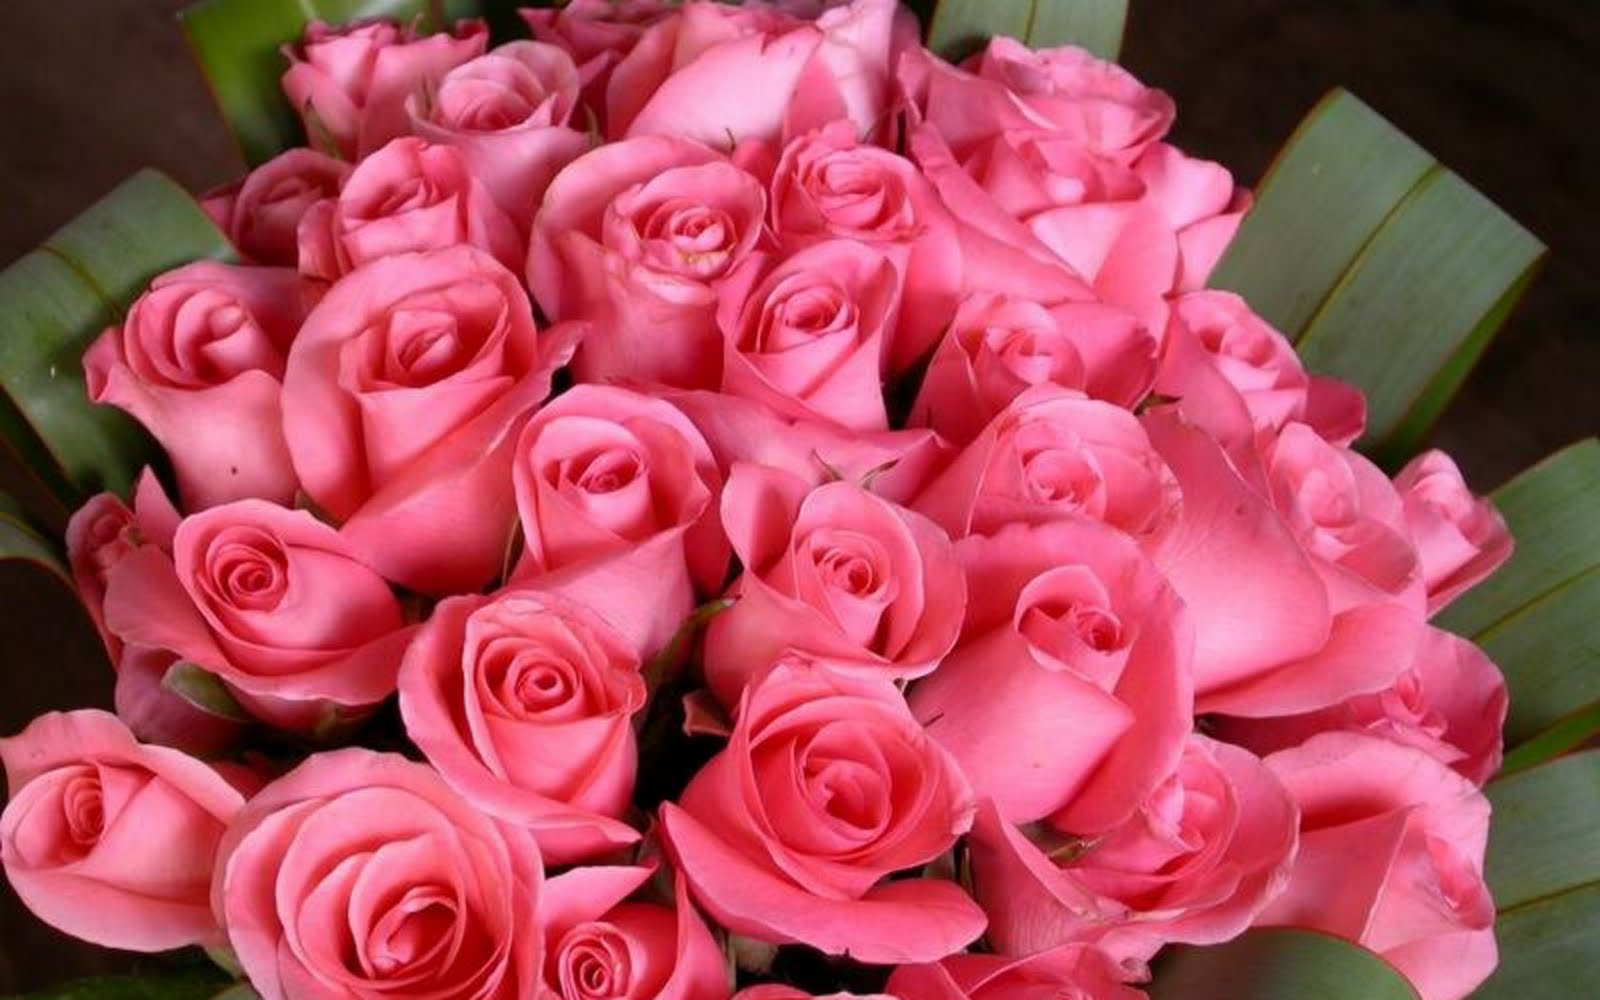 most beautiful bouquet of roses